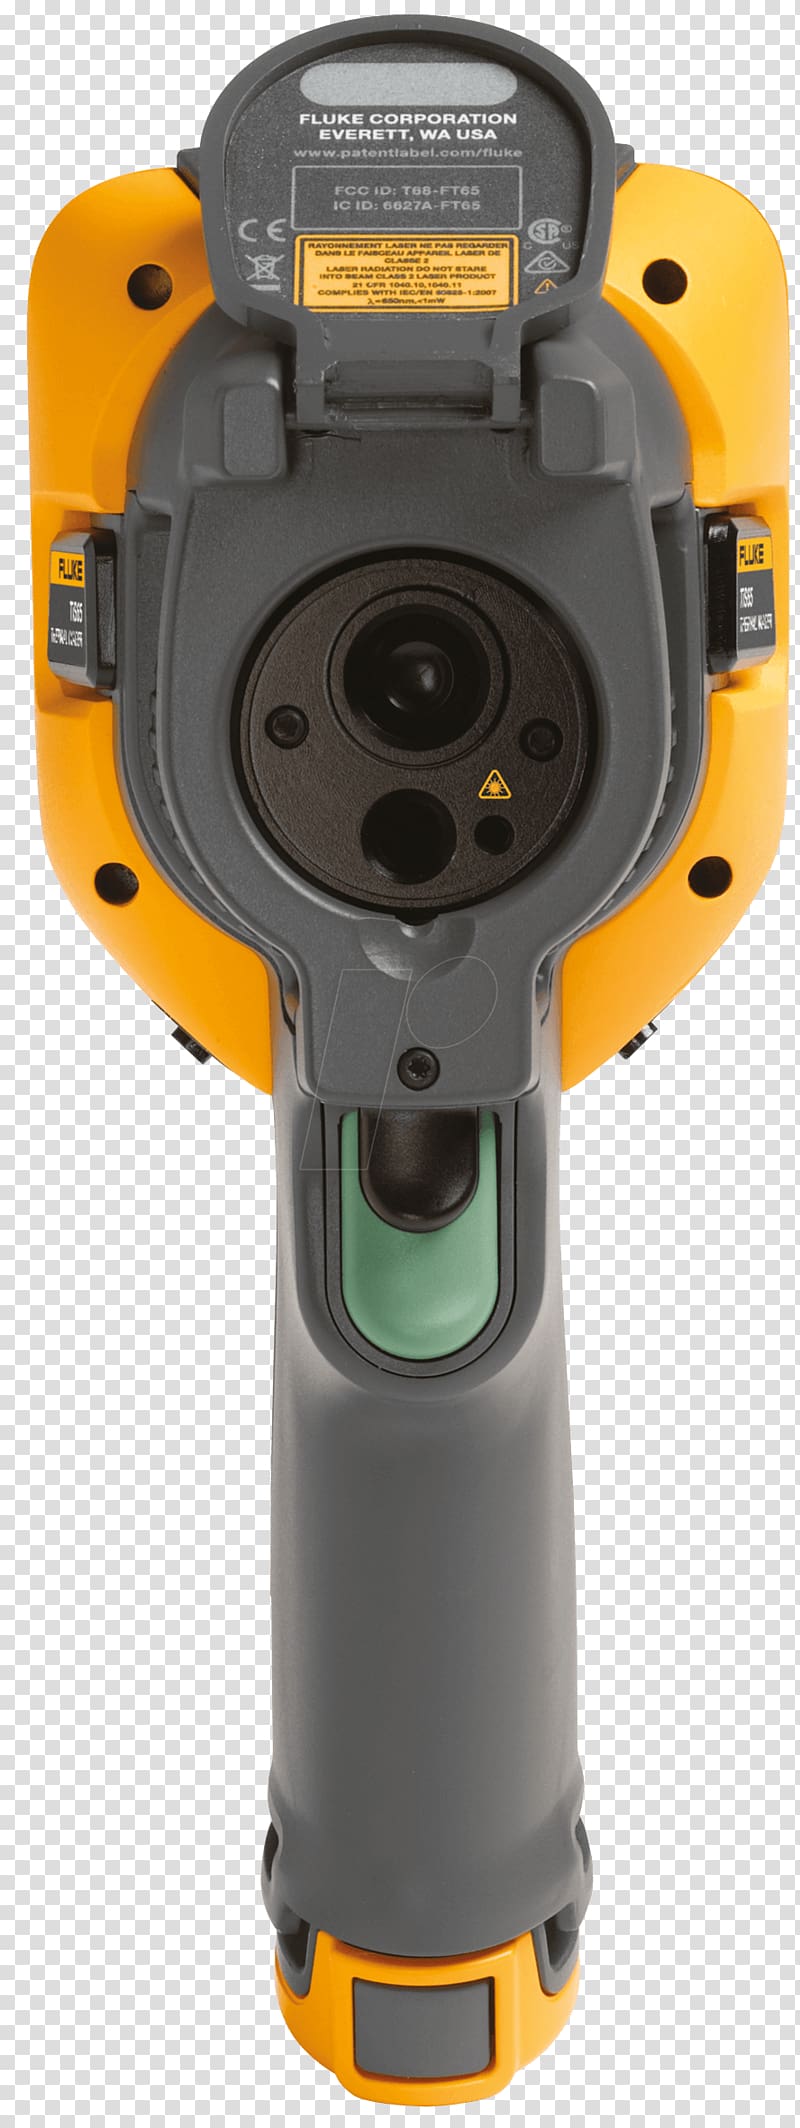 Thermographic camera Fluke Corporation Thermography Thermal imaging camera, Camera transparent background PNG clipart